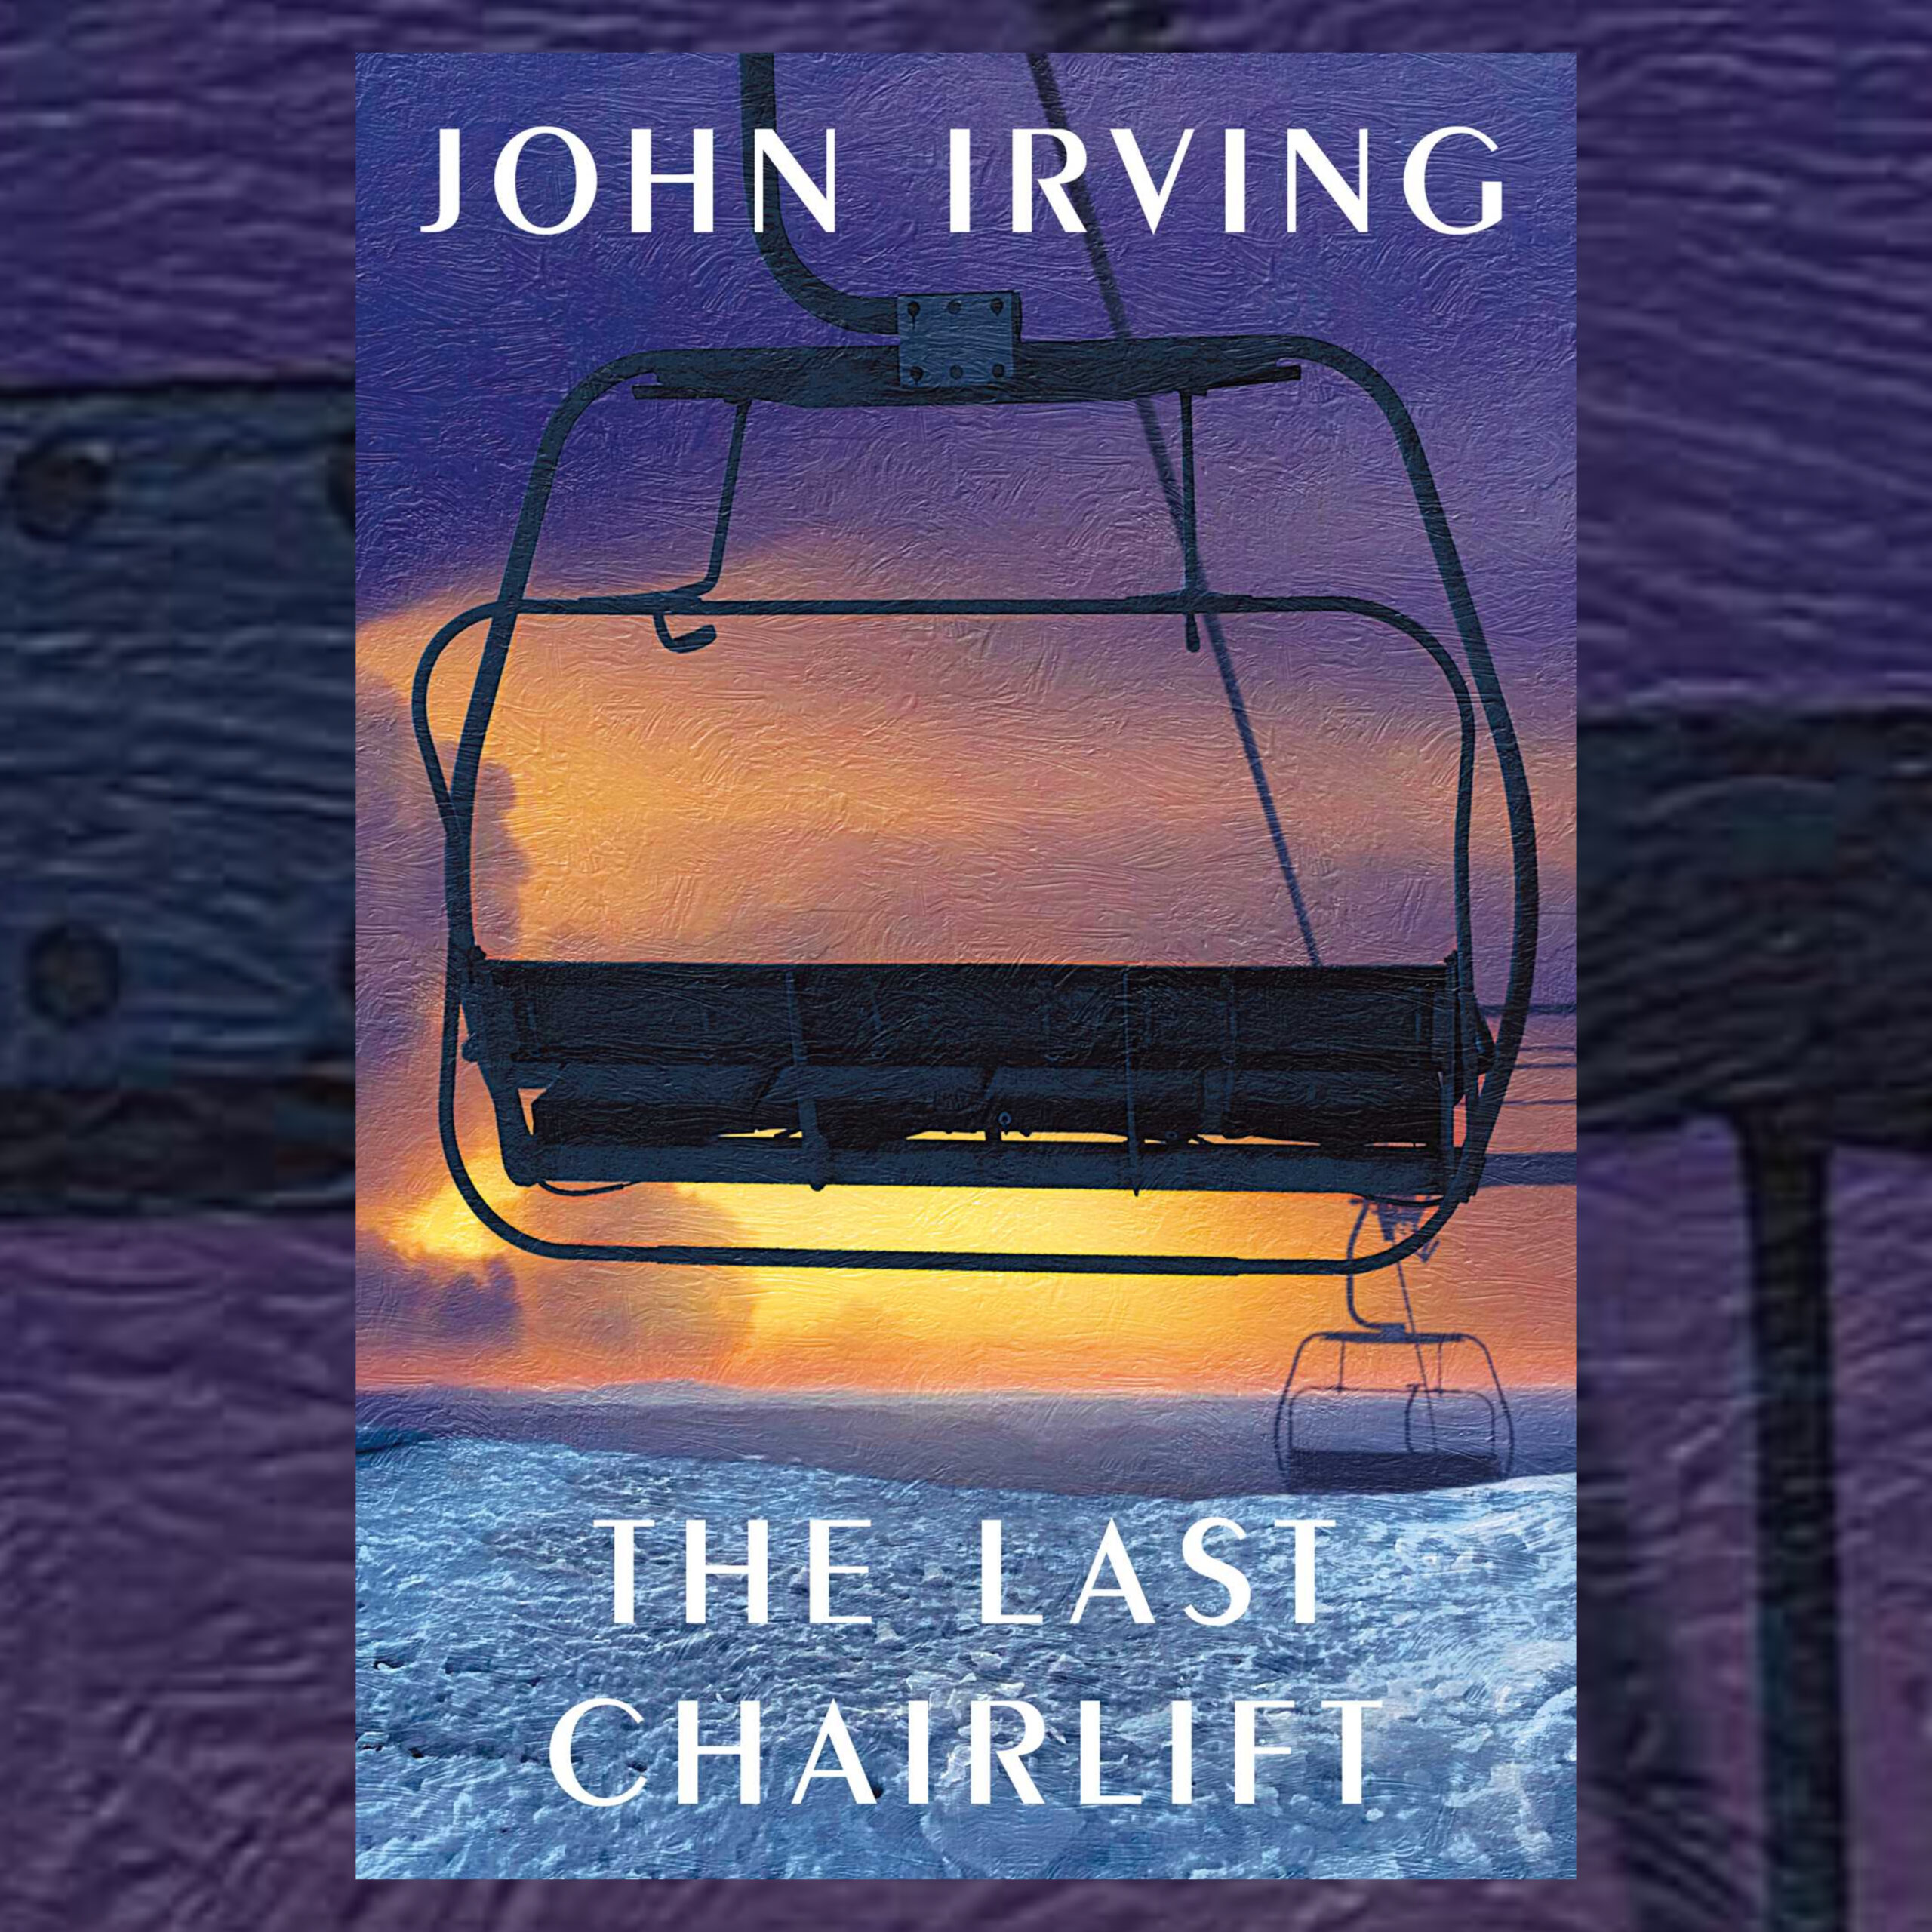 1790 - John Iriving - The Last Chairlift - The Book Show